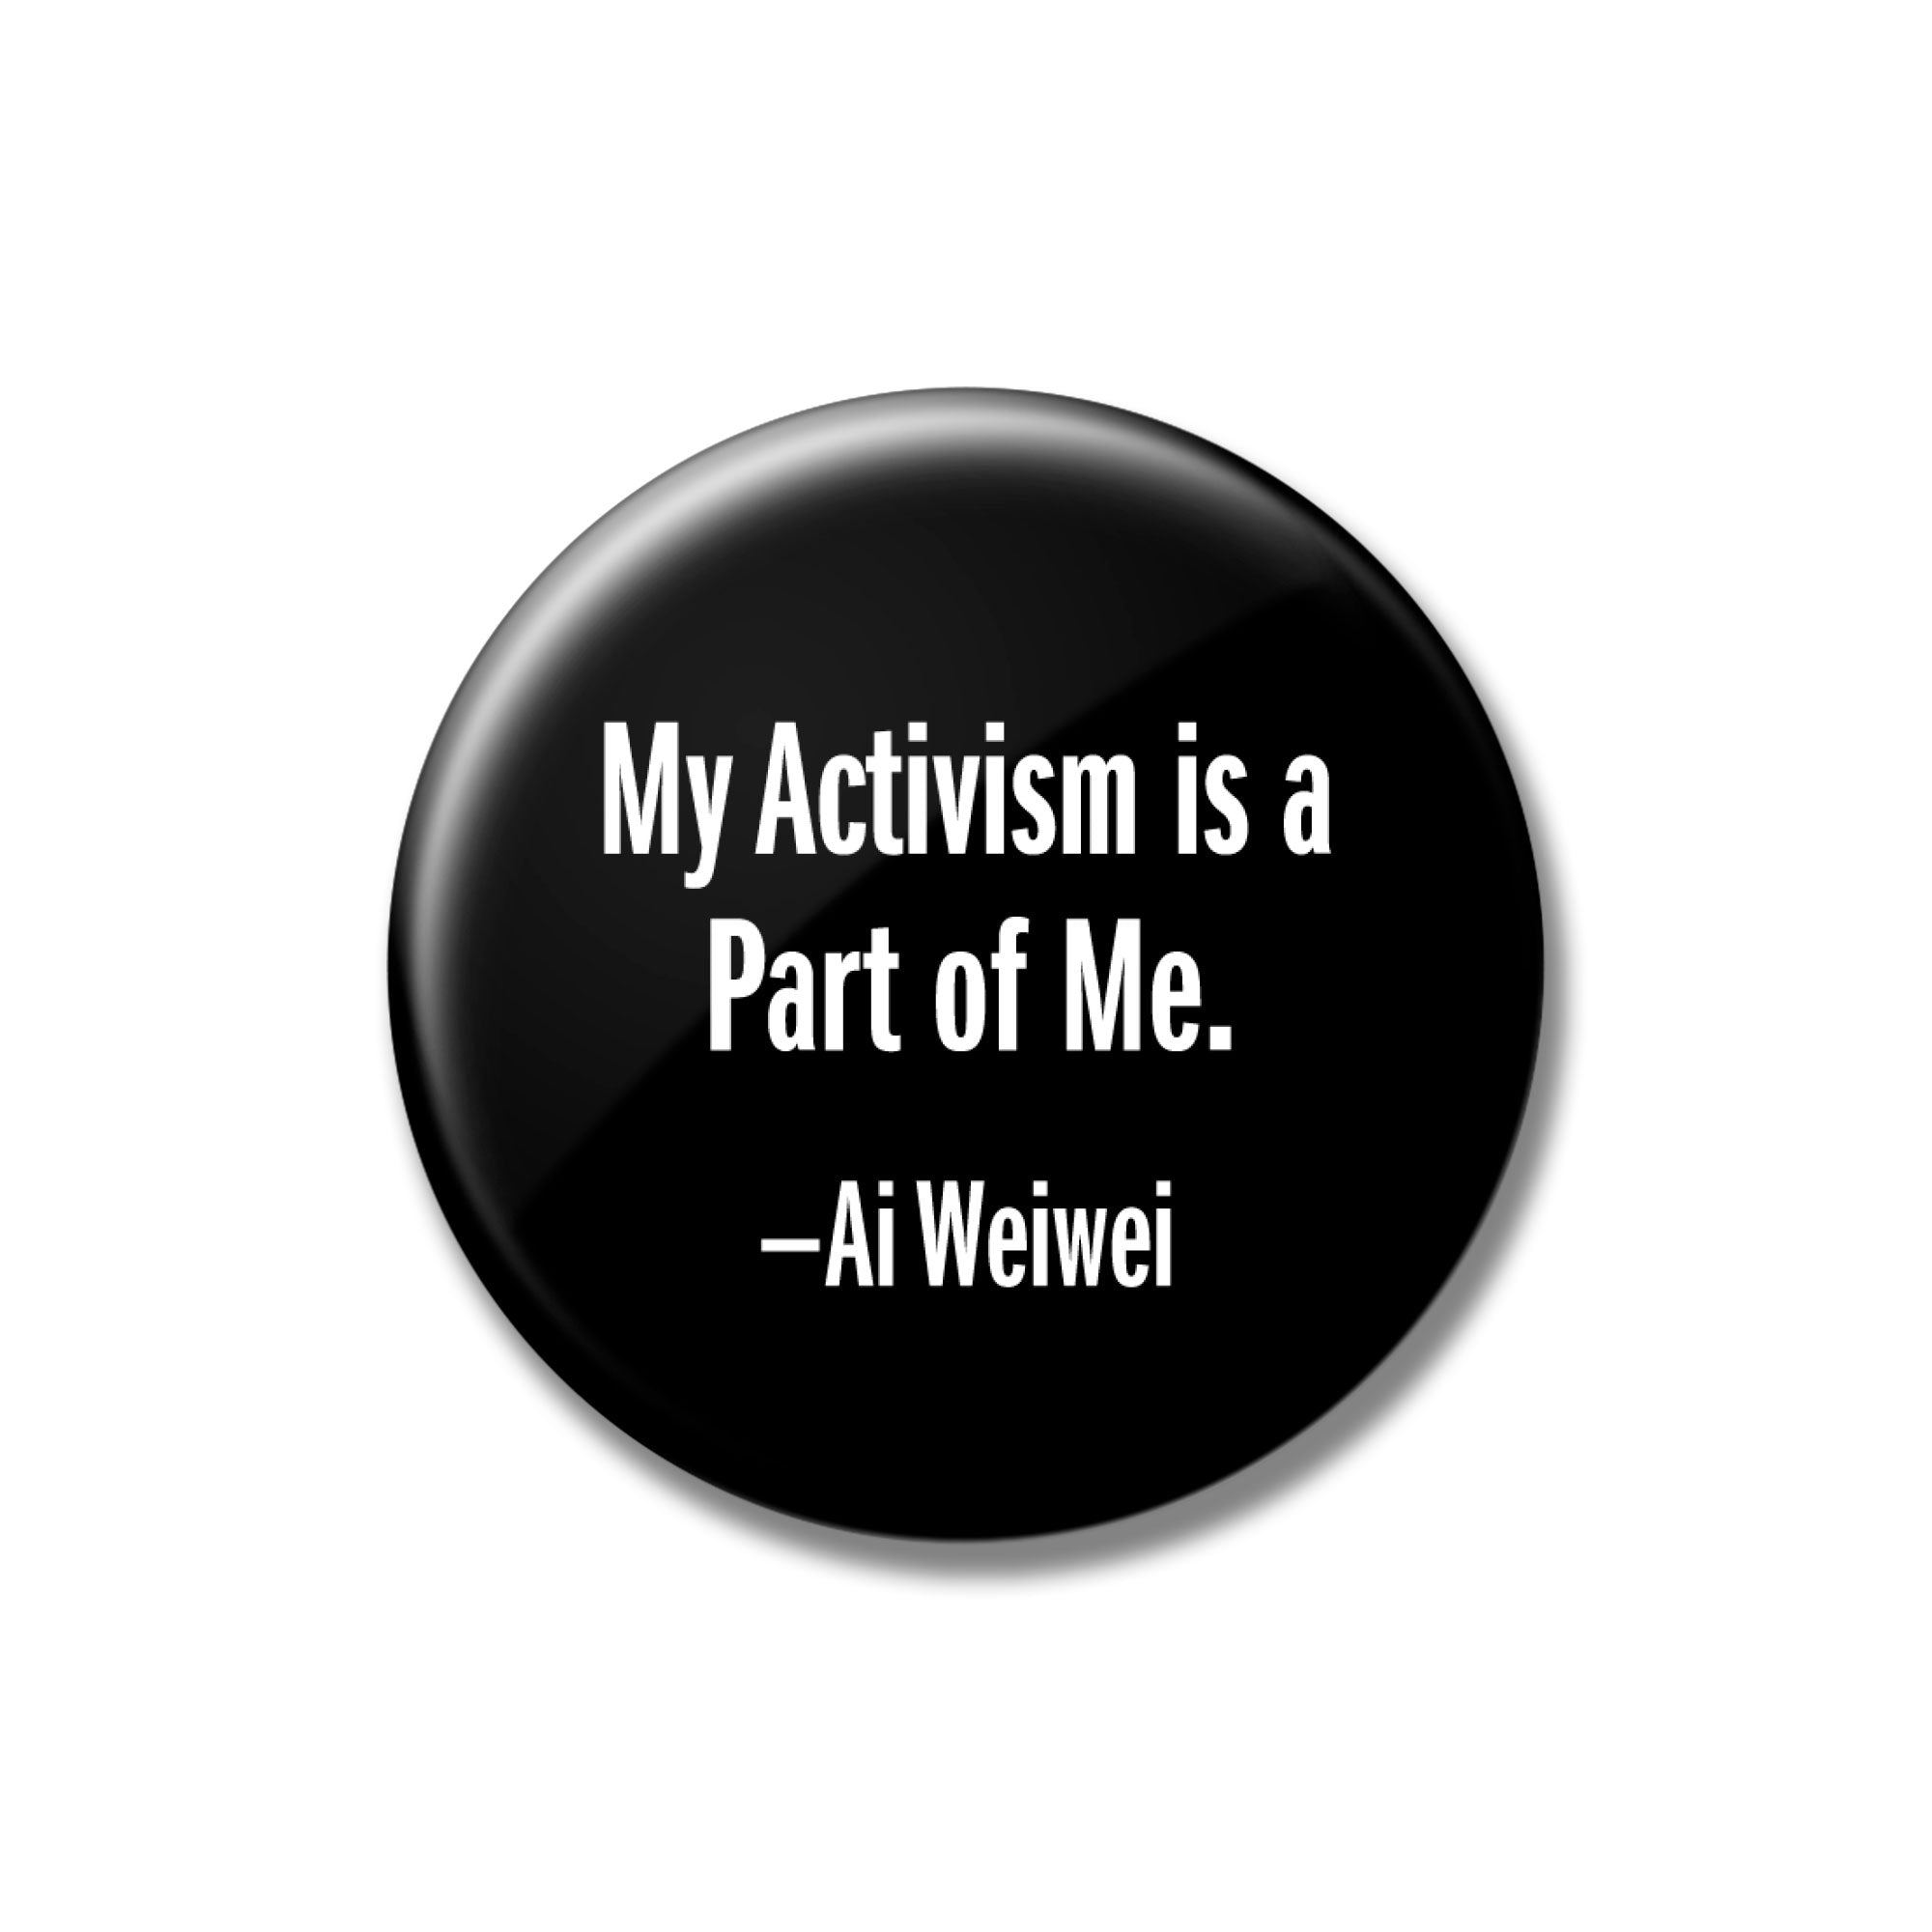 Ai Weiwei - My Activism is a Part of Me 2.25" Button